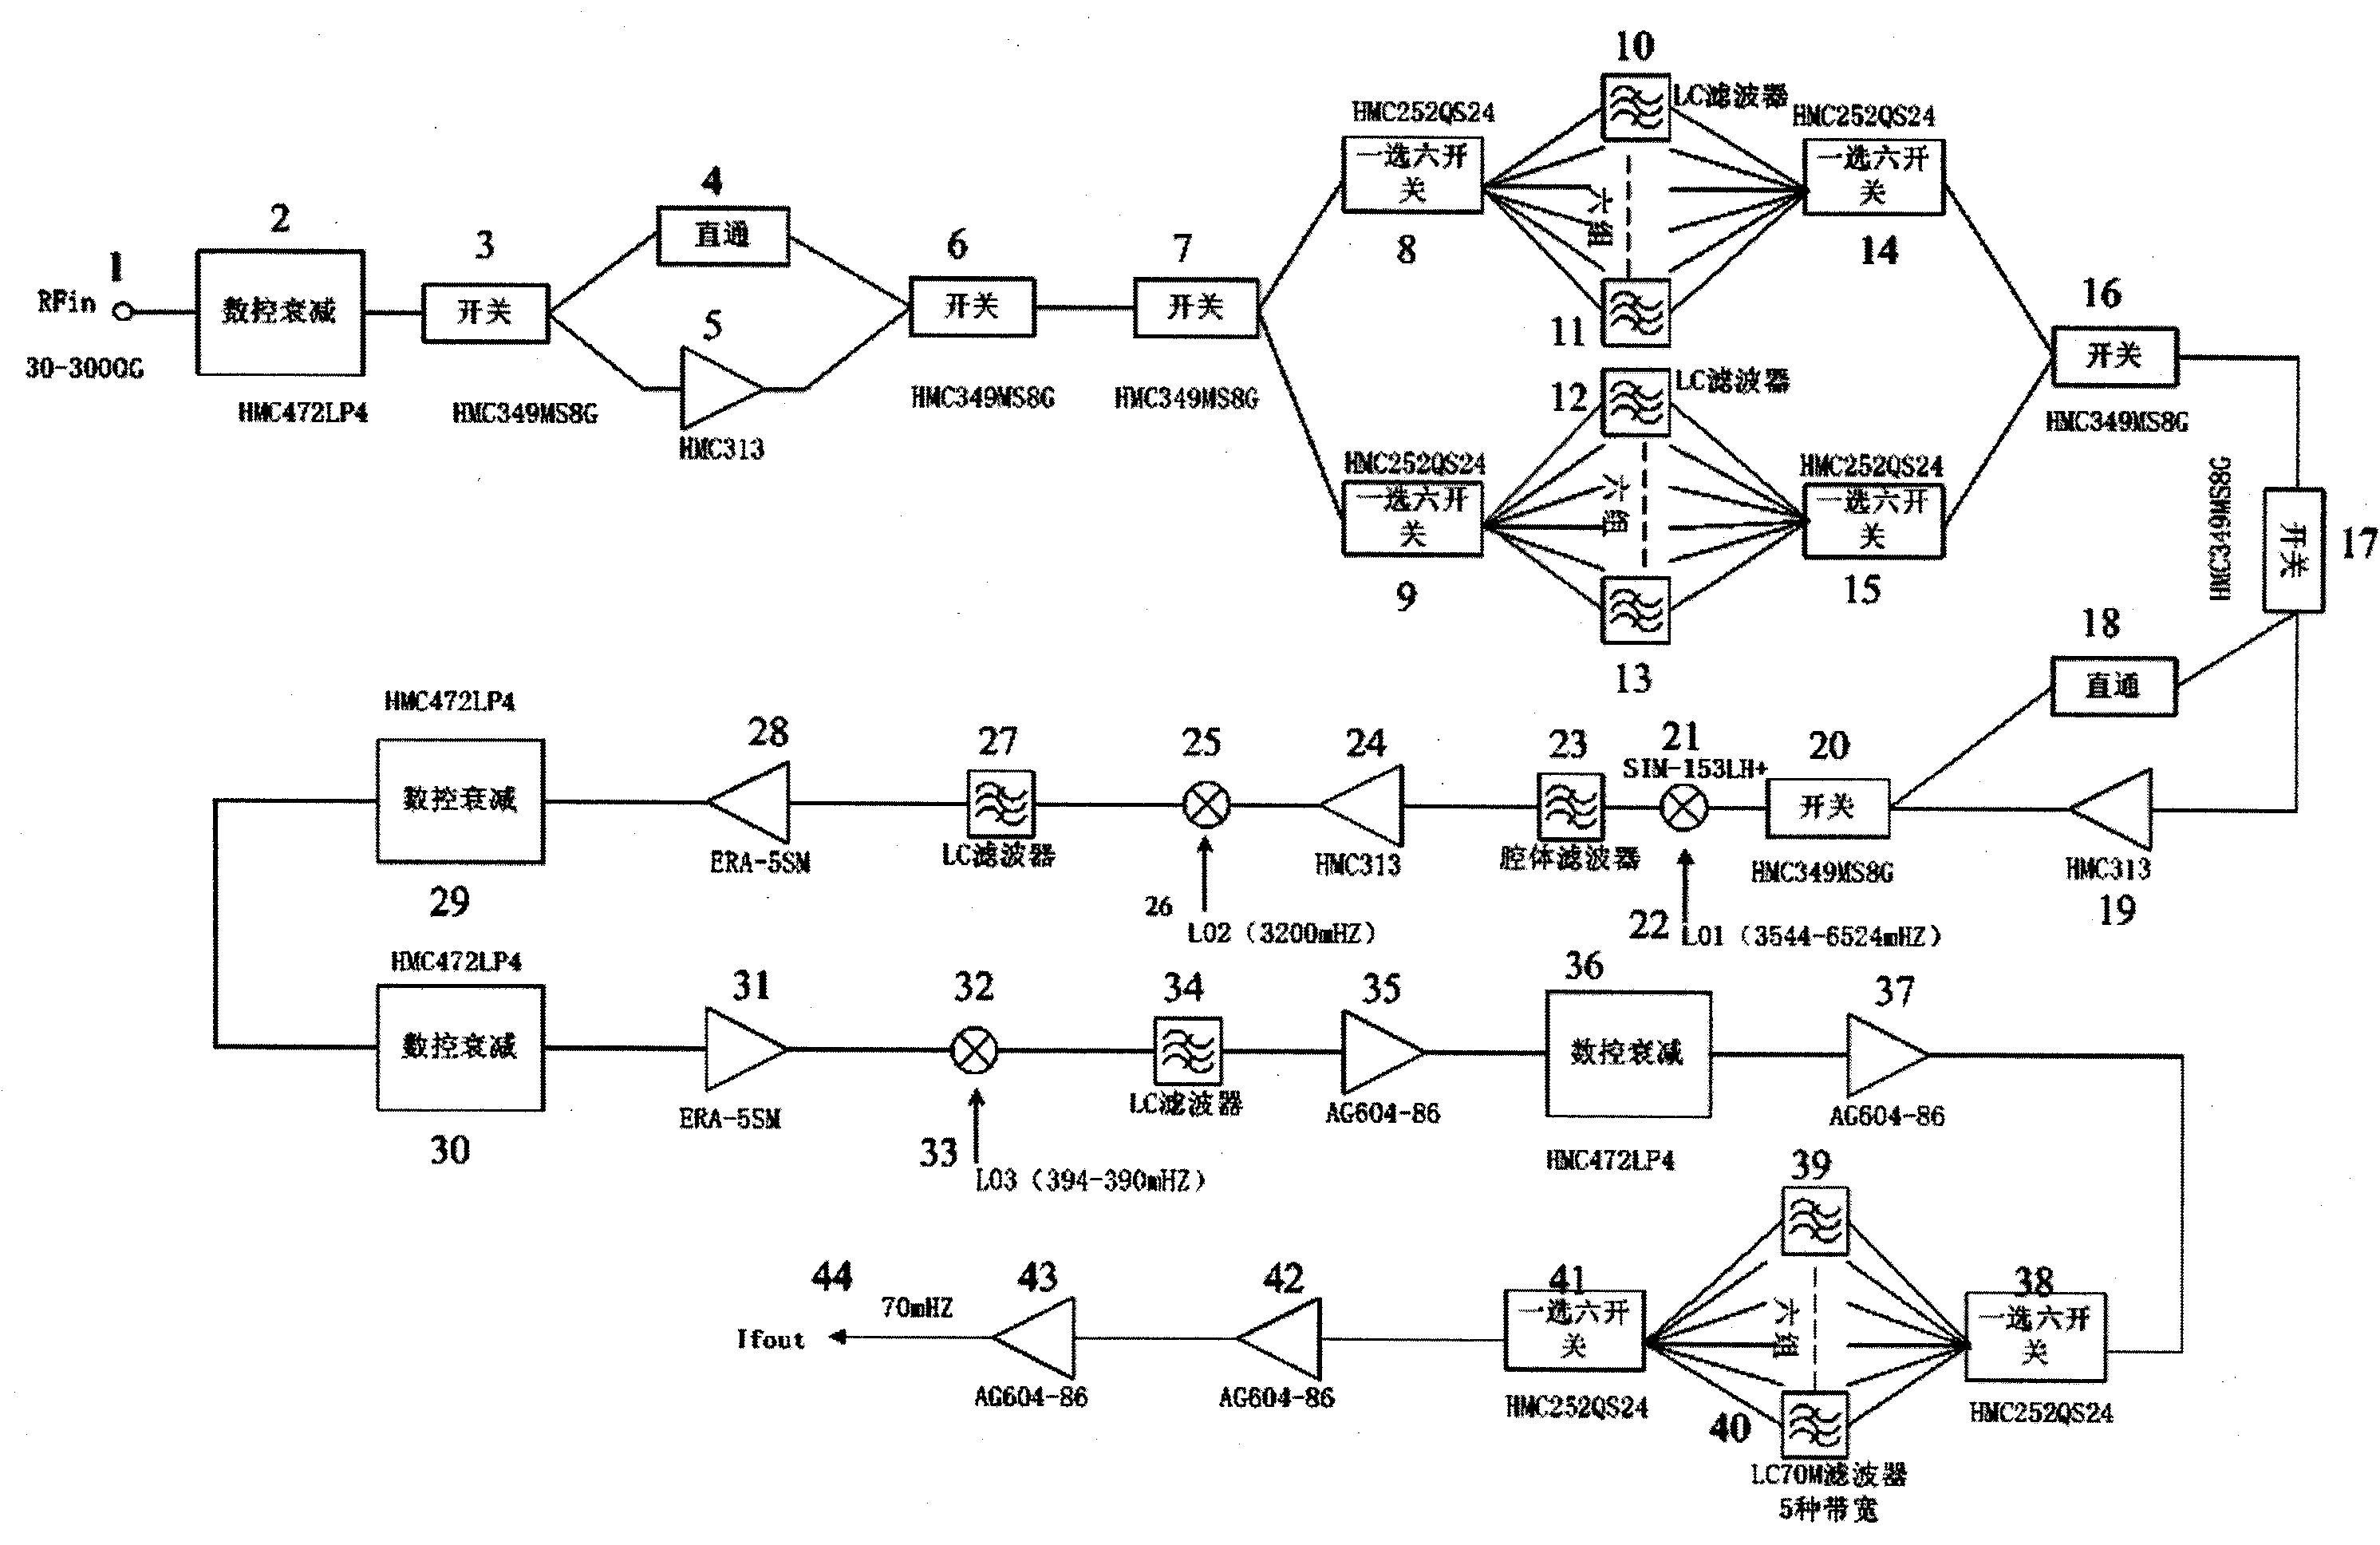 Broadband receiver with phase-locked loop local oscillation circuit